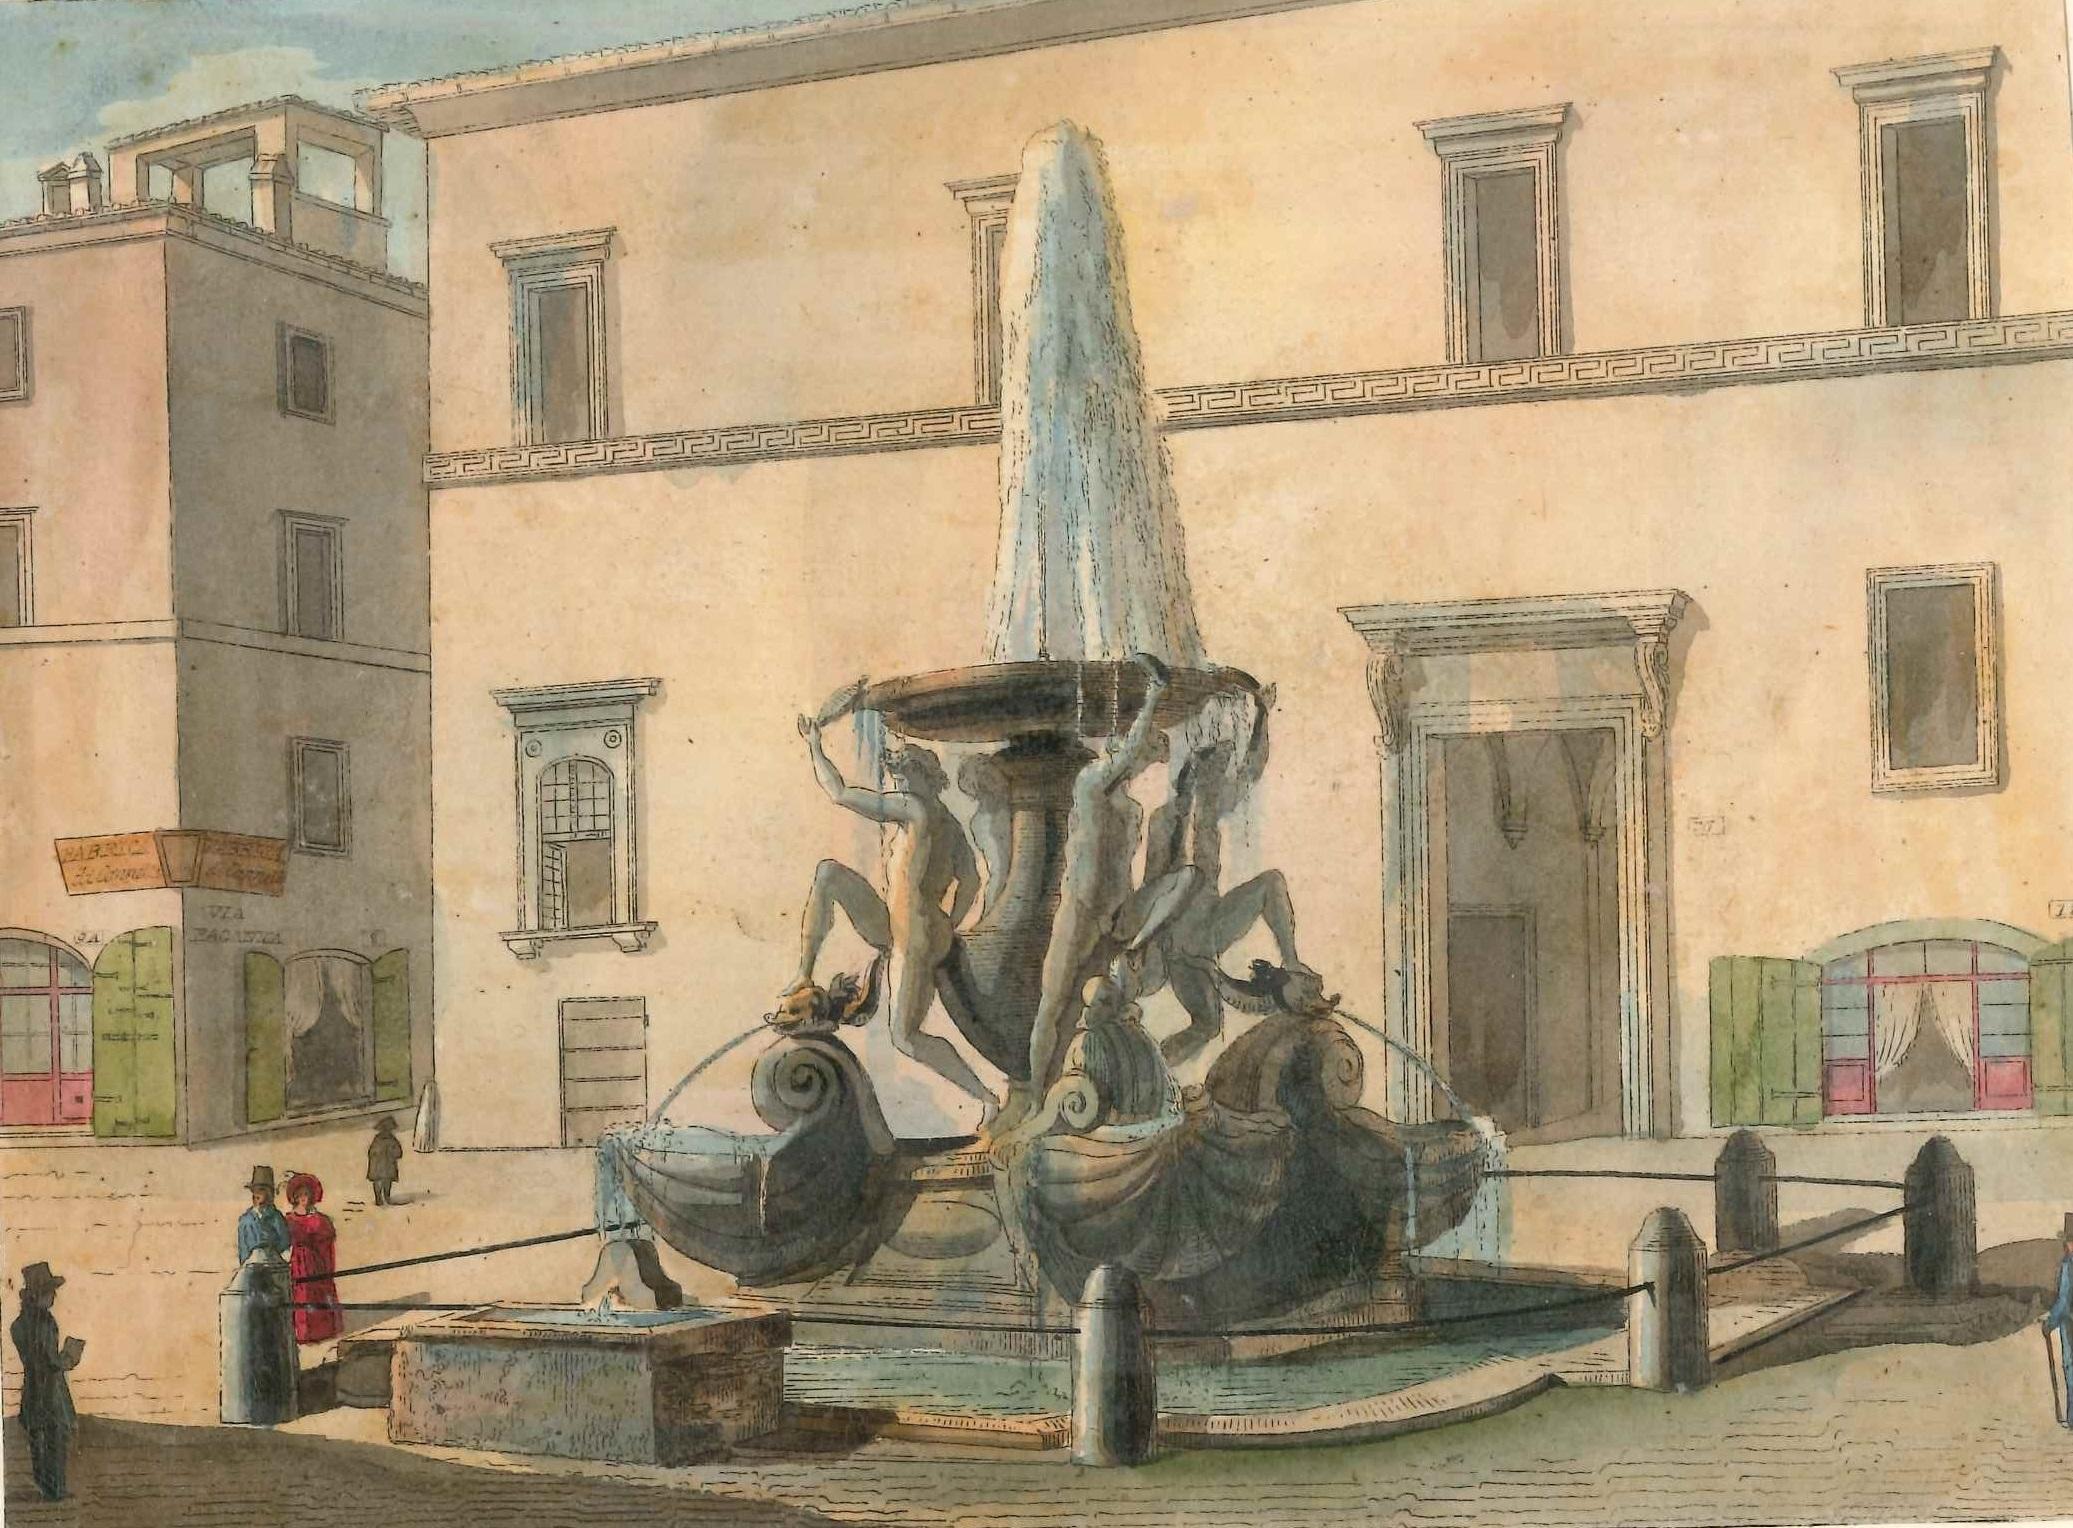 Roman Fountains - Original Lithographs and Watercolors - Mid 19th Century